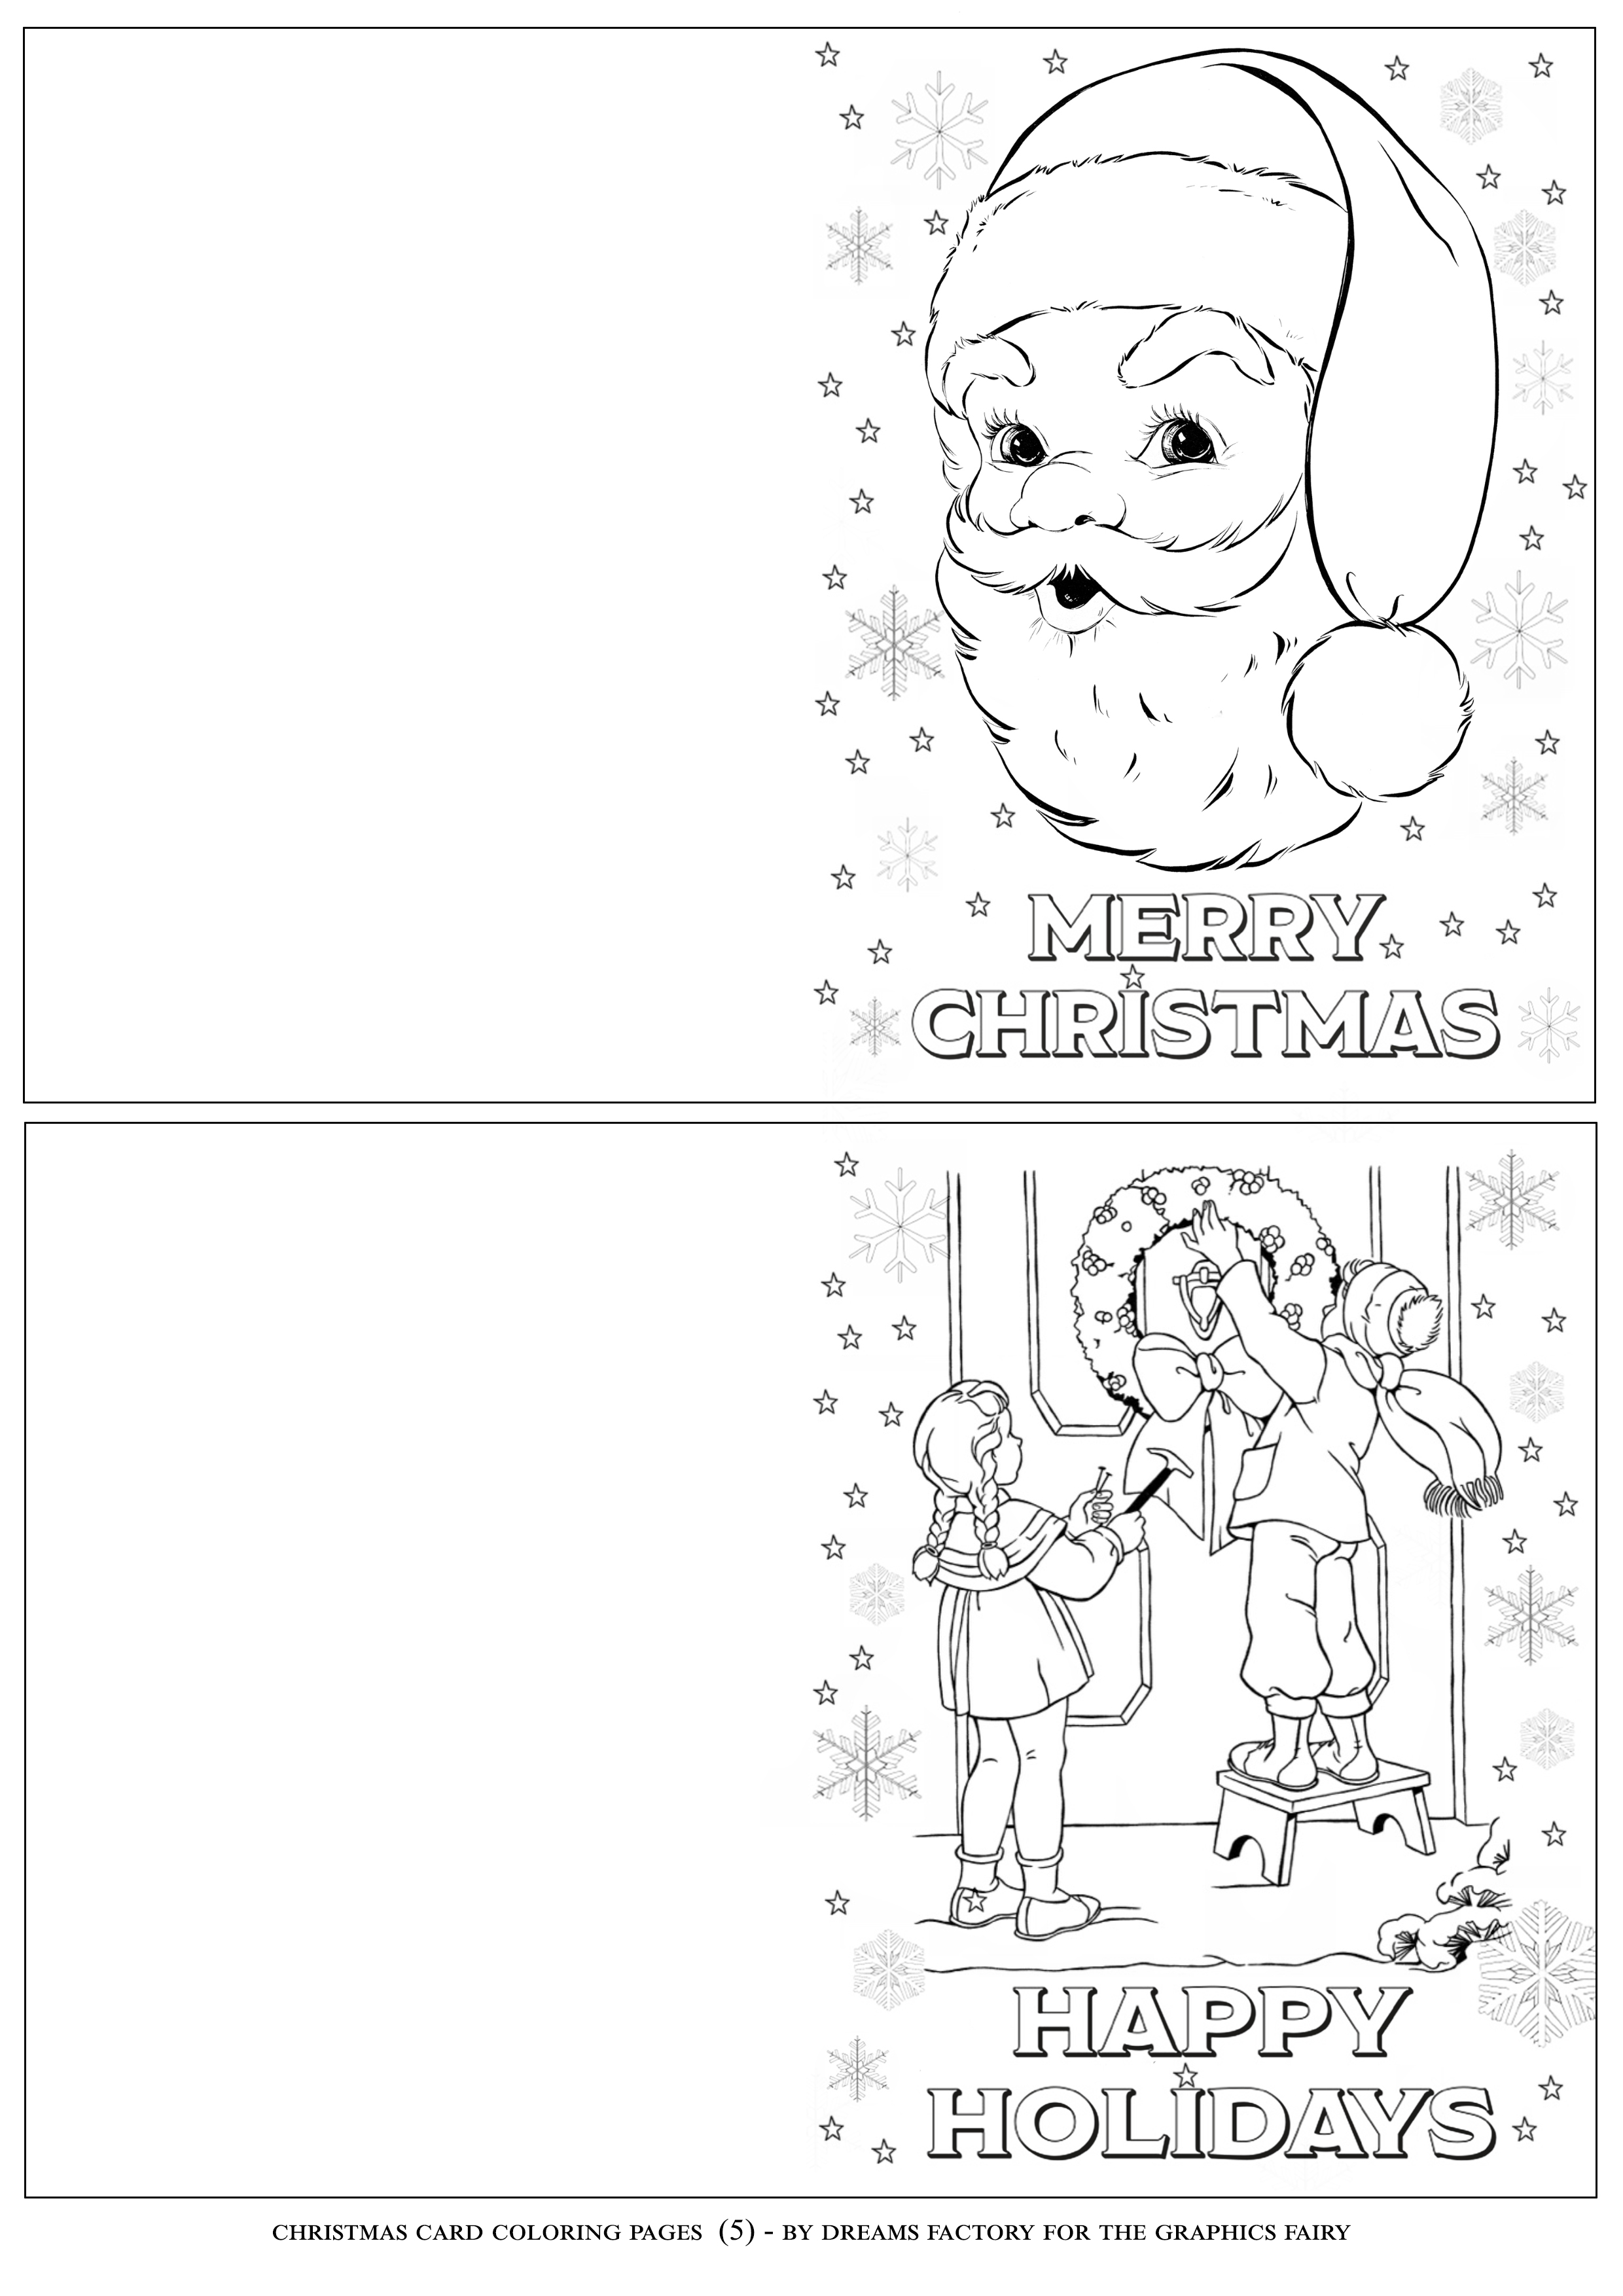 Christmas card coloring pages 5